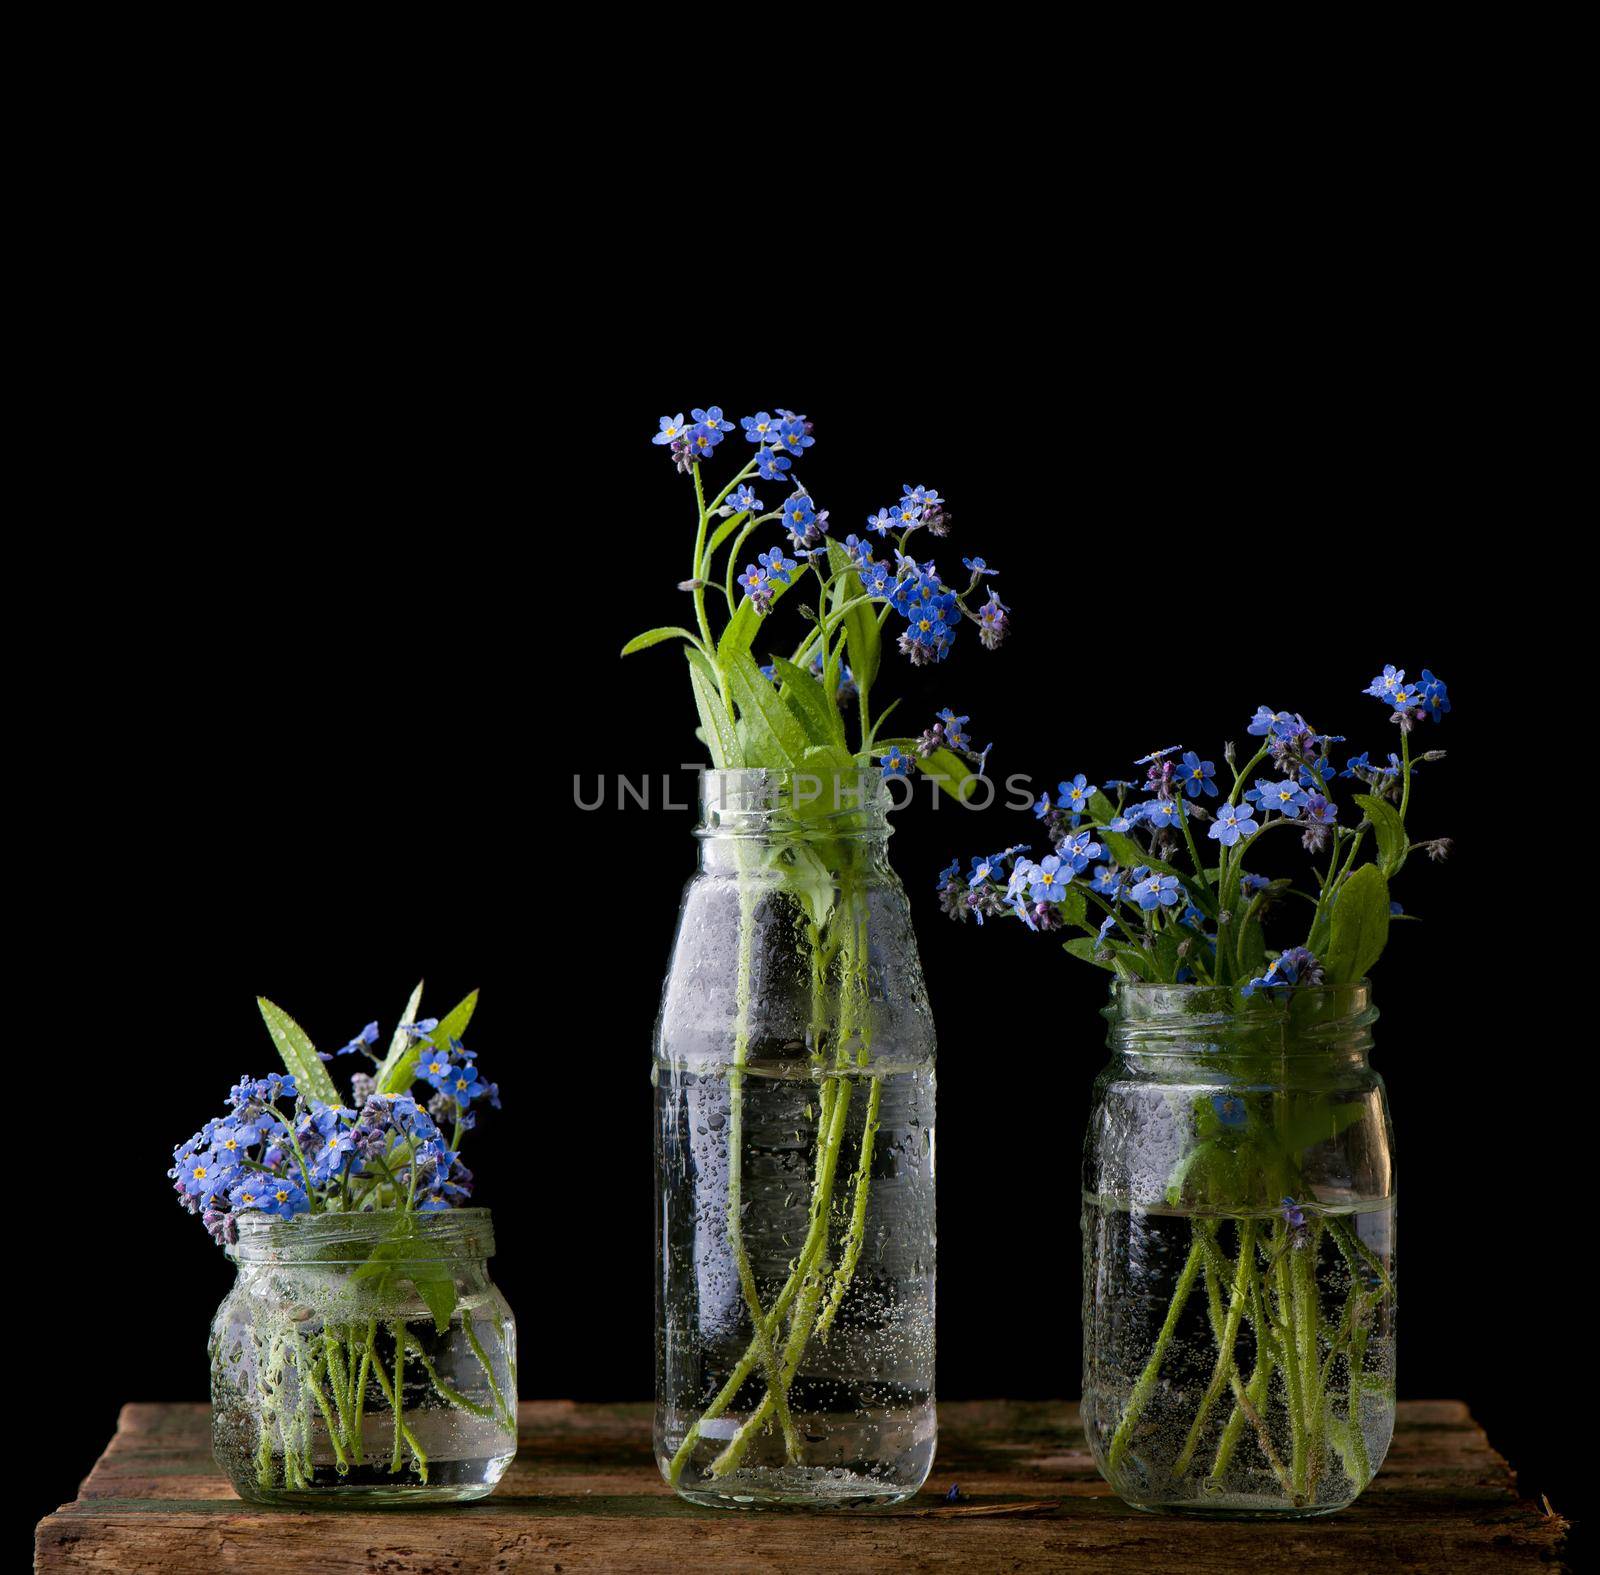 forget-me-not bouquet in glass jars on a wooden table by aprilphoto